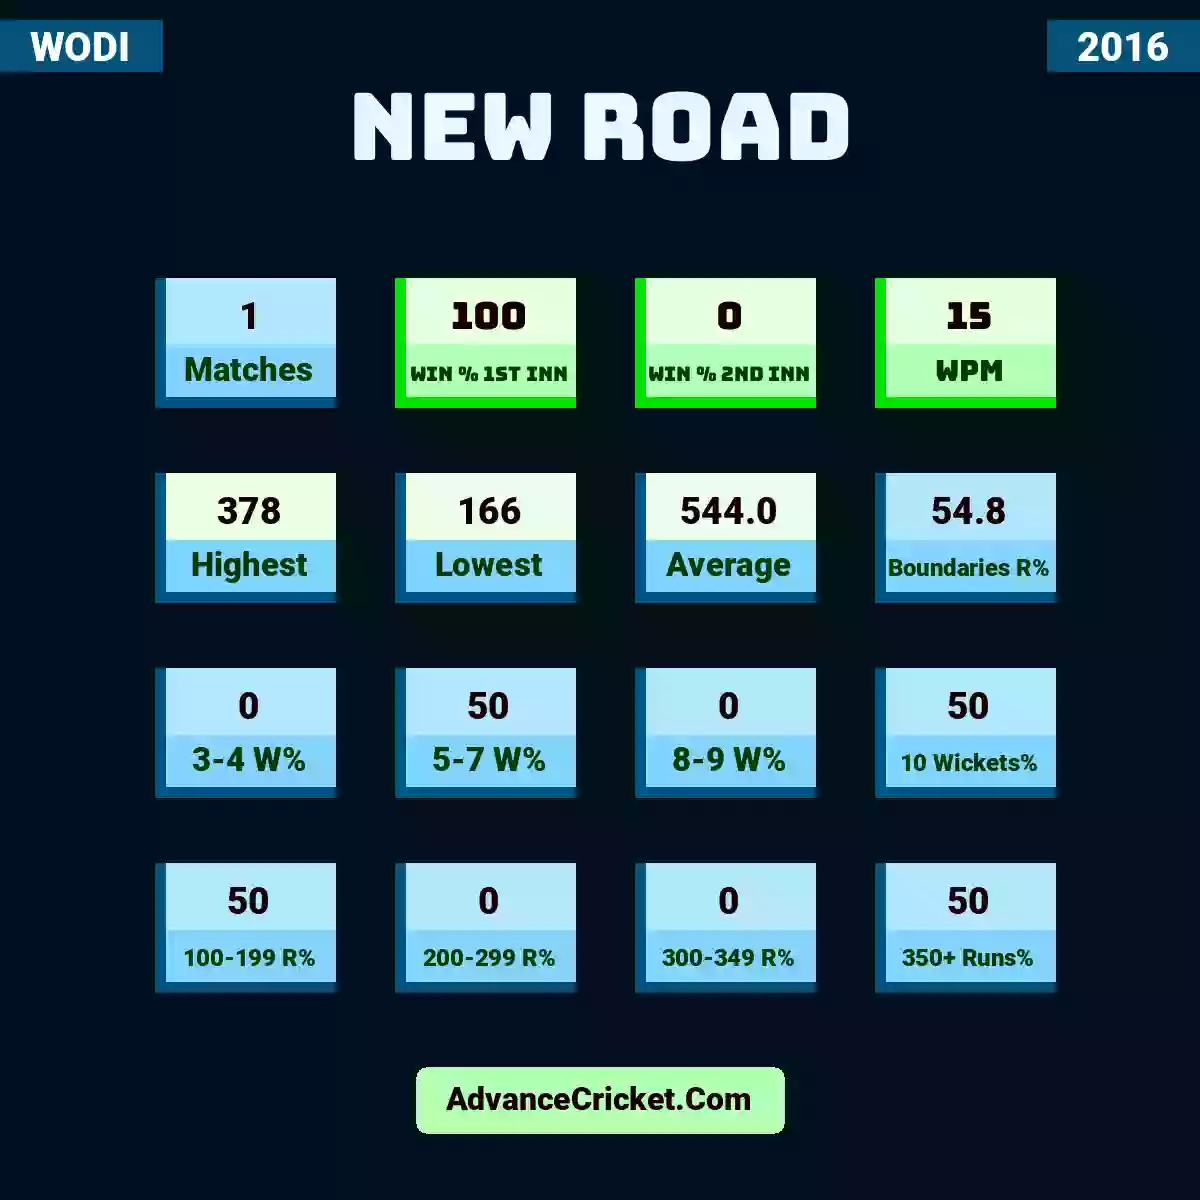 Image showing New Road with Matches: 1, Win % 1st Inn: 100, Win % 2nd Inn: 0, WPM: 15, Highest: 378, Lowest: 166, Average: 544.0, Boundaries R%: 54.8, 3-4 W%: 0, 5-7 W%: 50, 8-9 W%: 0, 10 Wickets%: 50, 100-199 R%: 50, 200-299 R%: 0, 300-349 R%: 0, 350+ Runs%: 50.